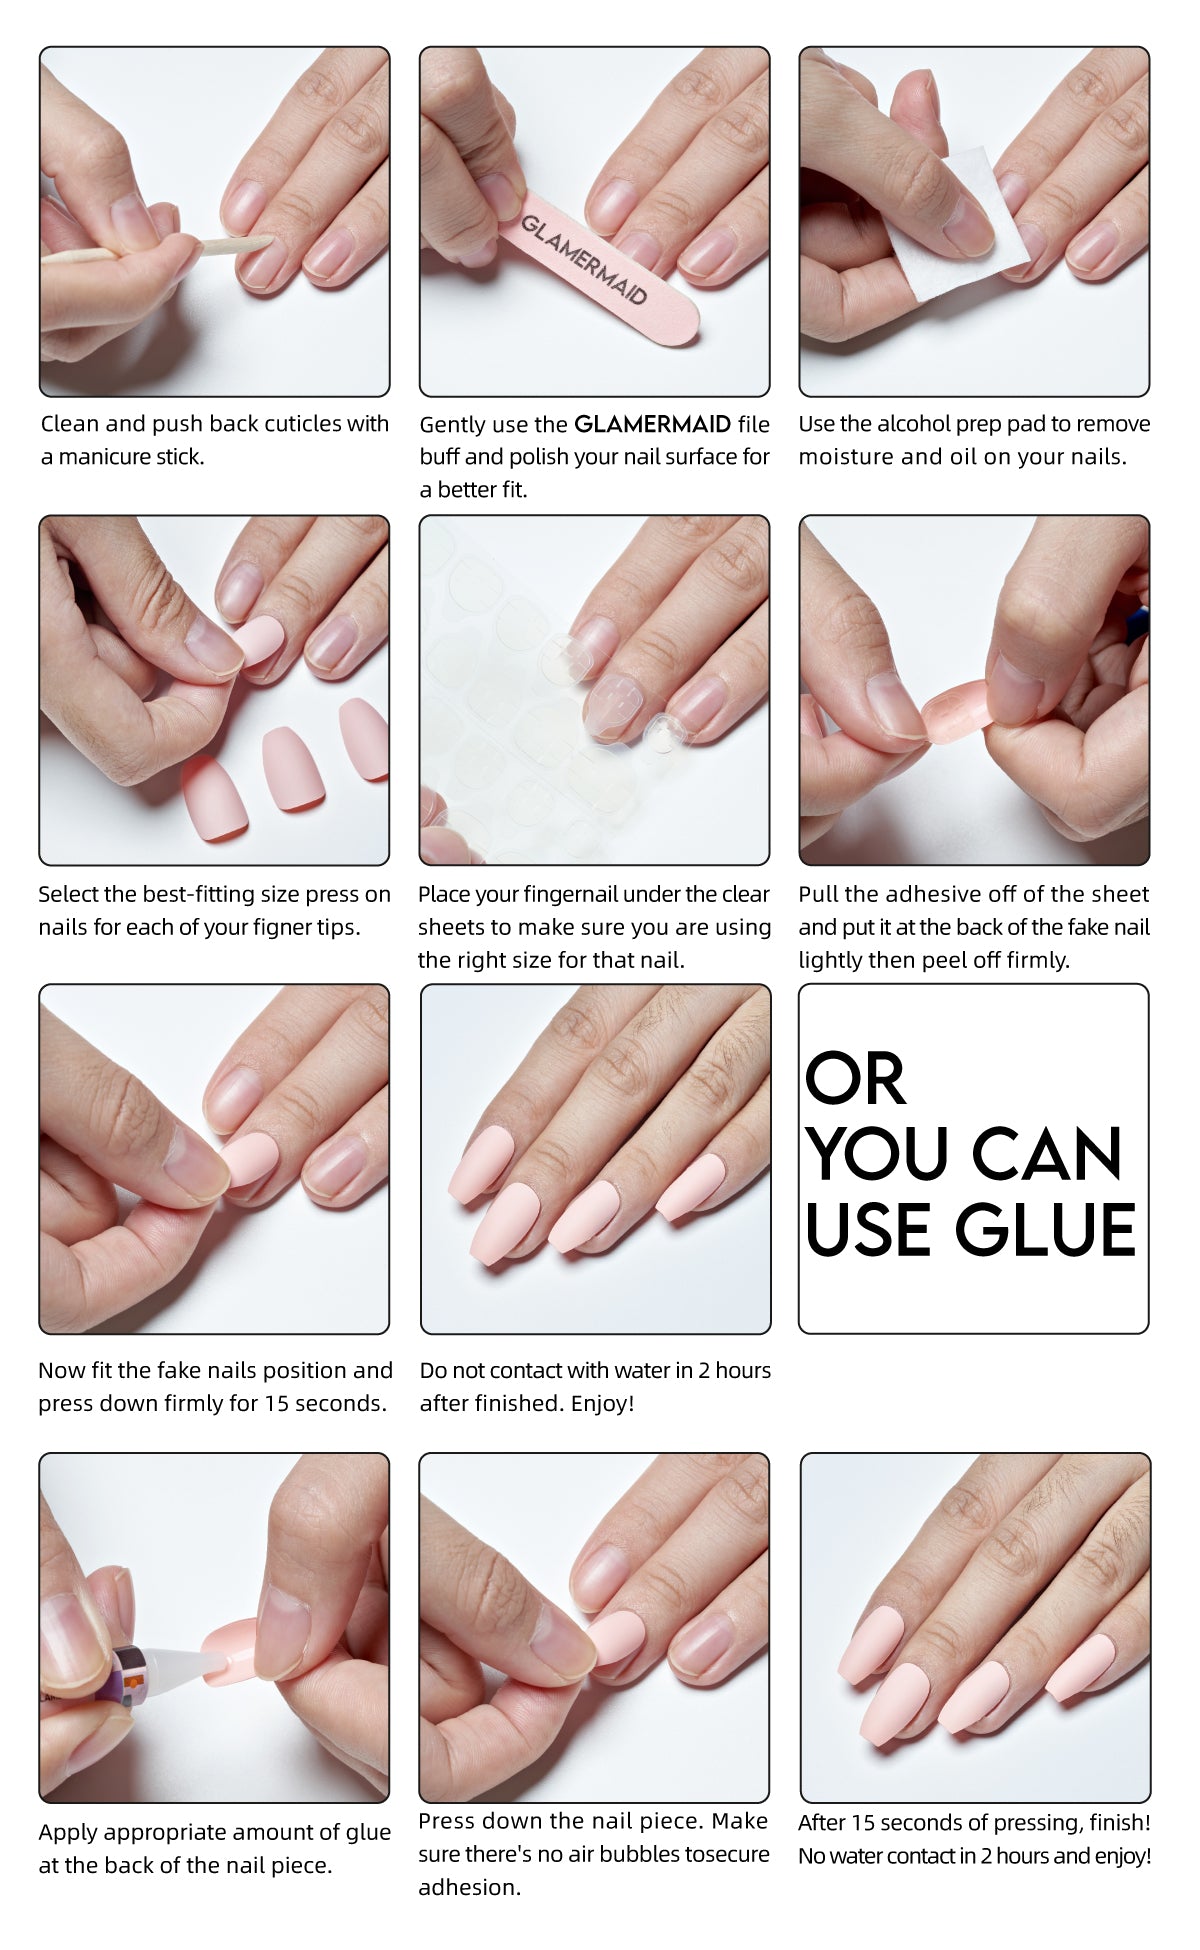 How to prep your nails before a manicure